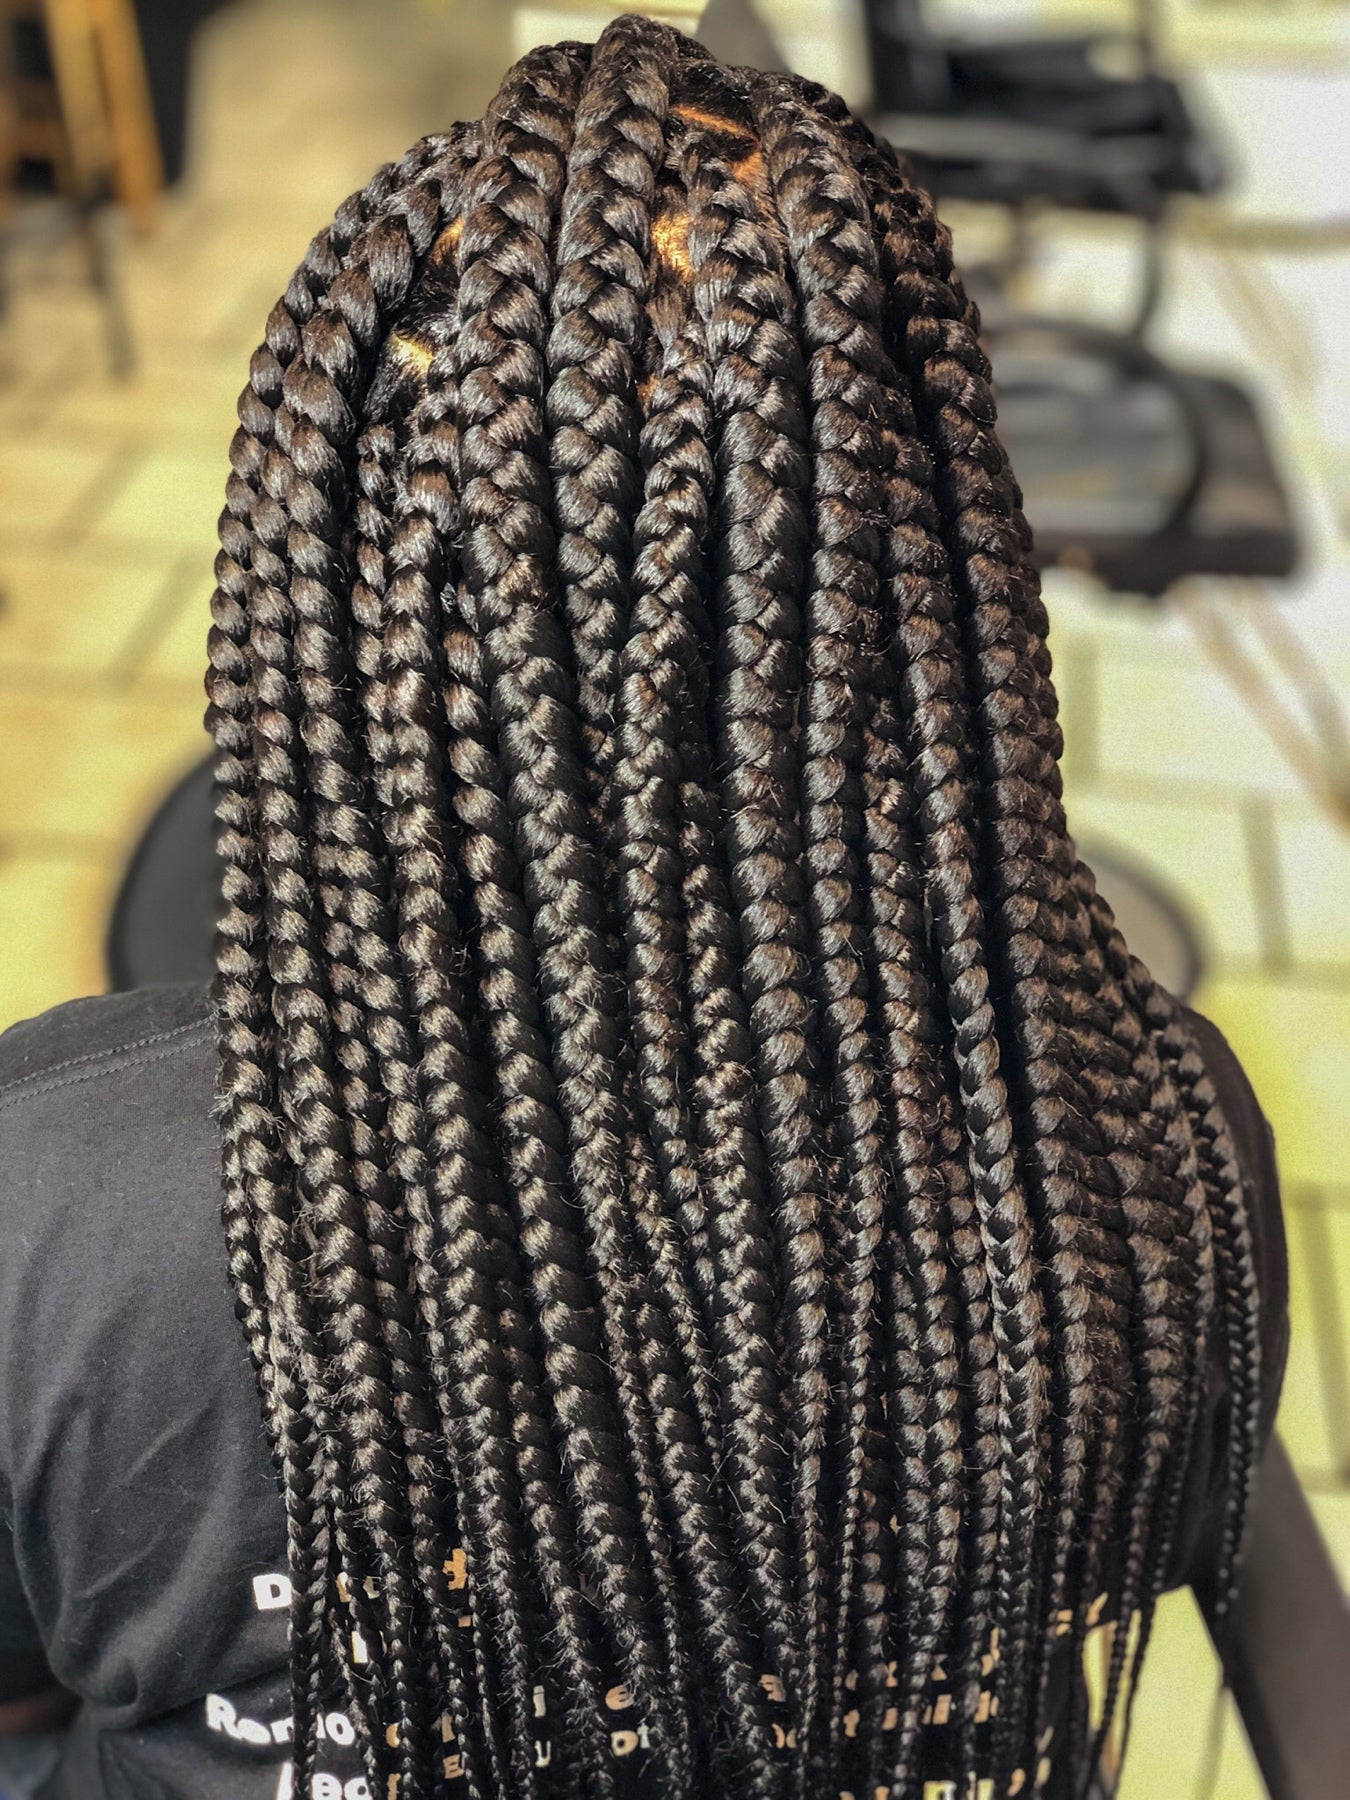 45 Hot Fulani Braids to Copy This Summer - StayGlam